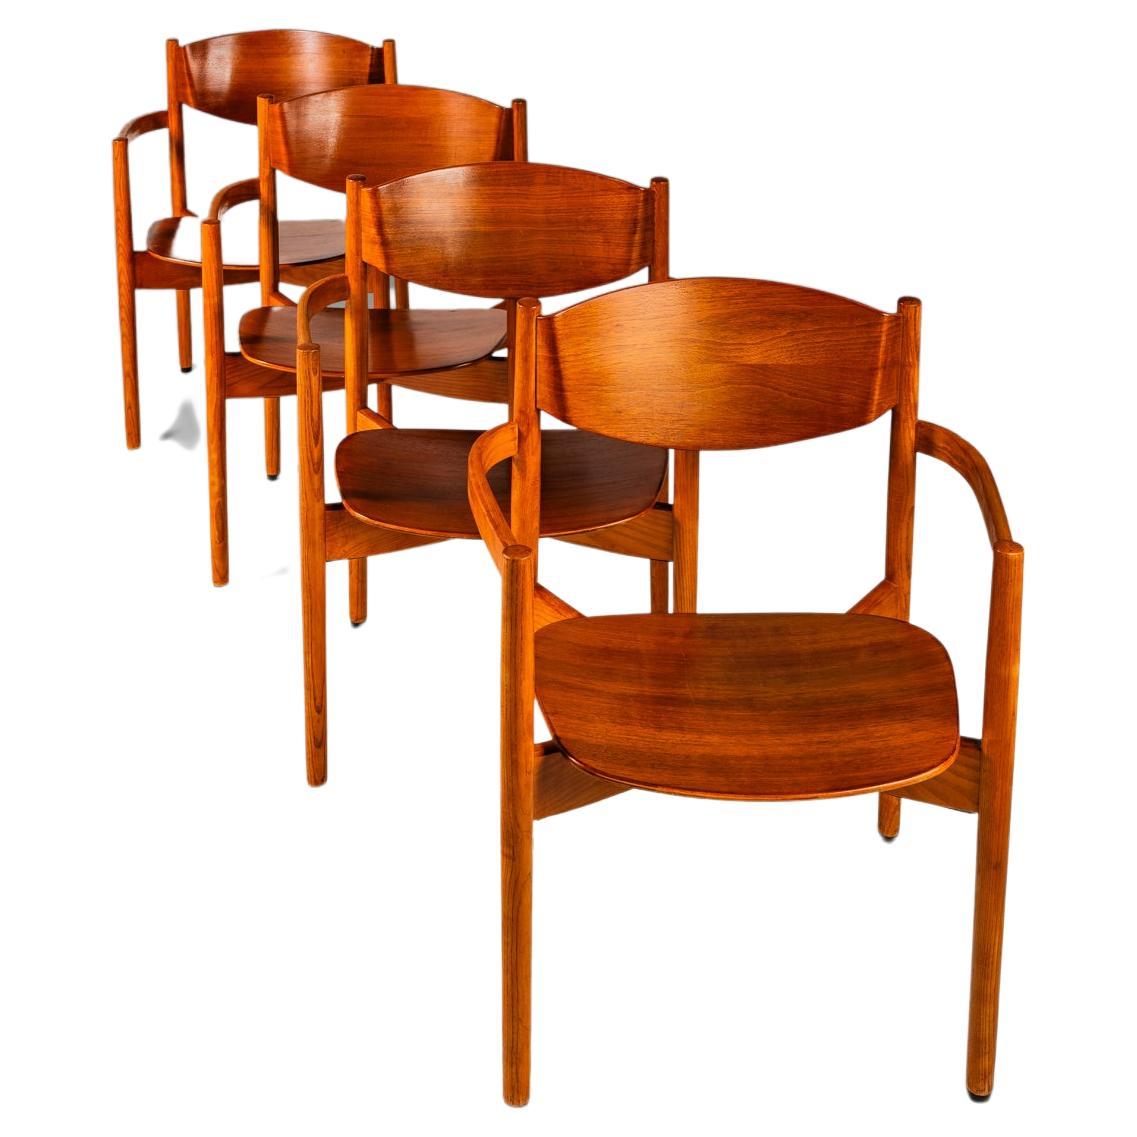 Set of 4 Stacking in Oak & Walnut Chairs by Jens Risom, USA, c. 1960s For Sale